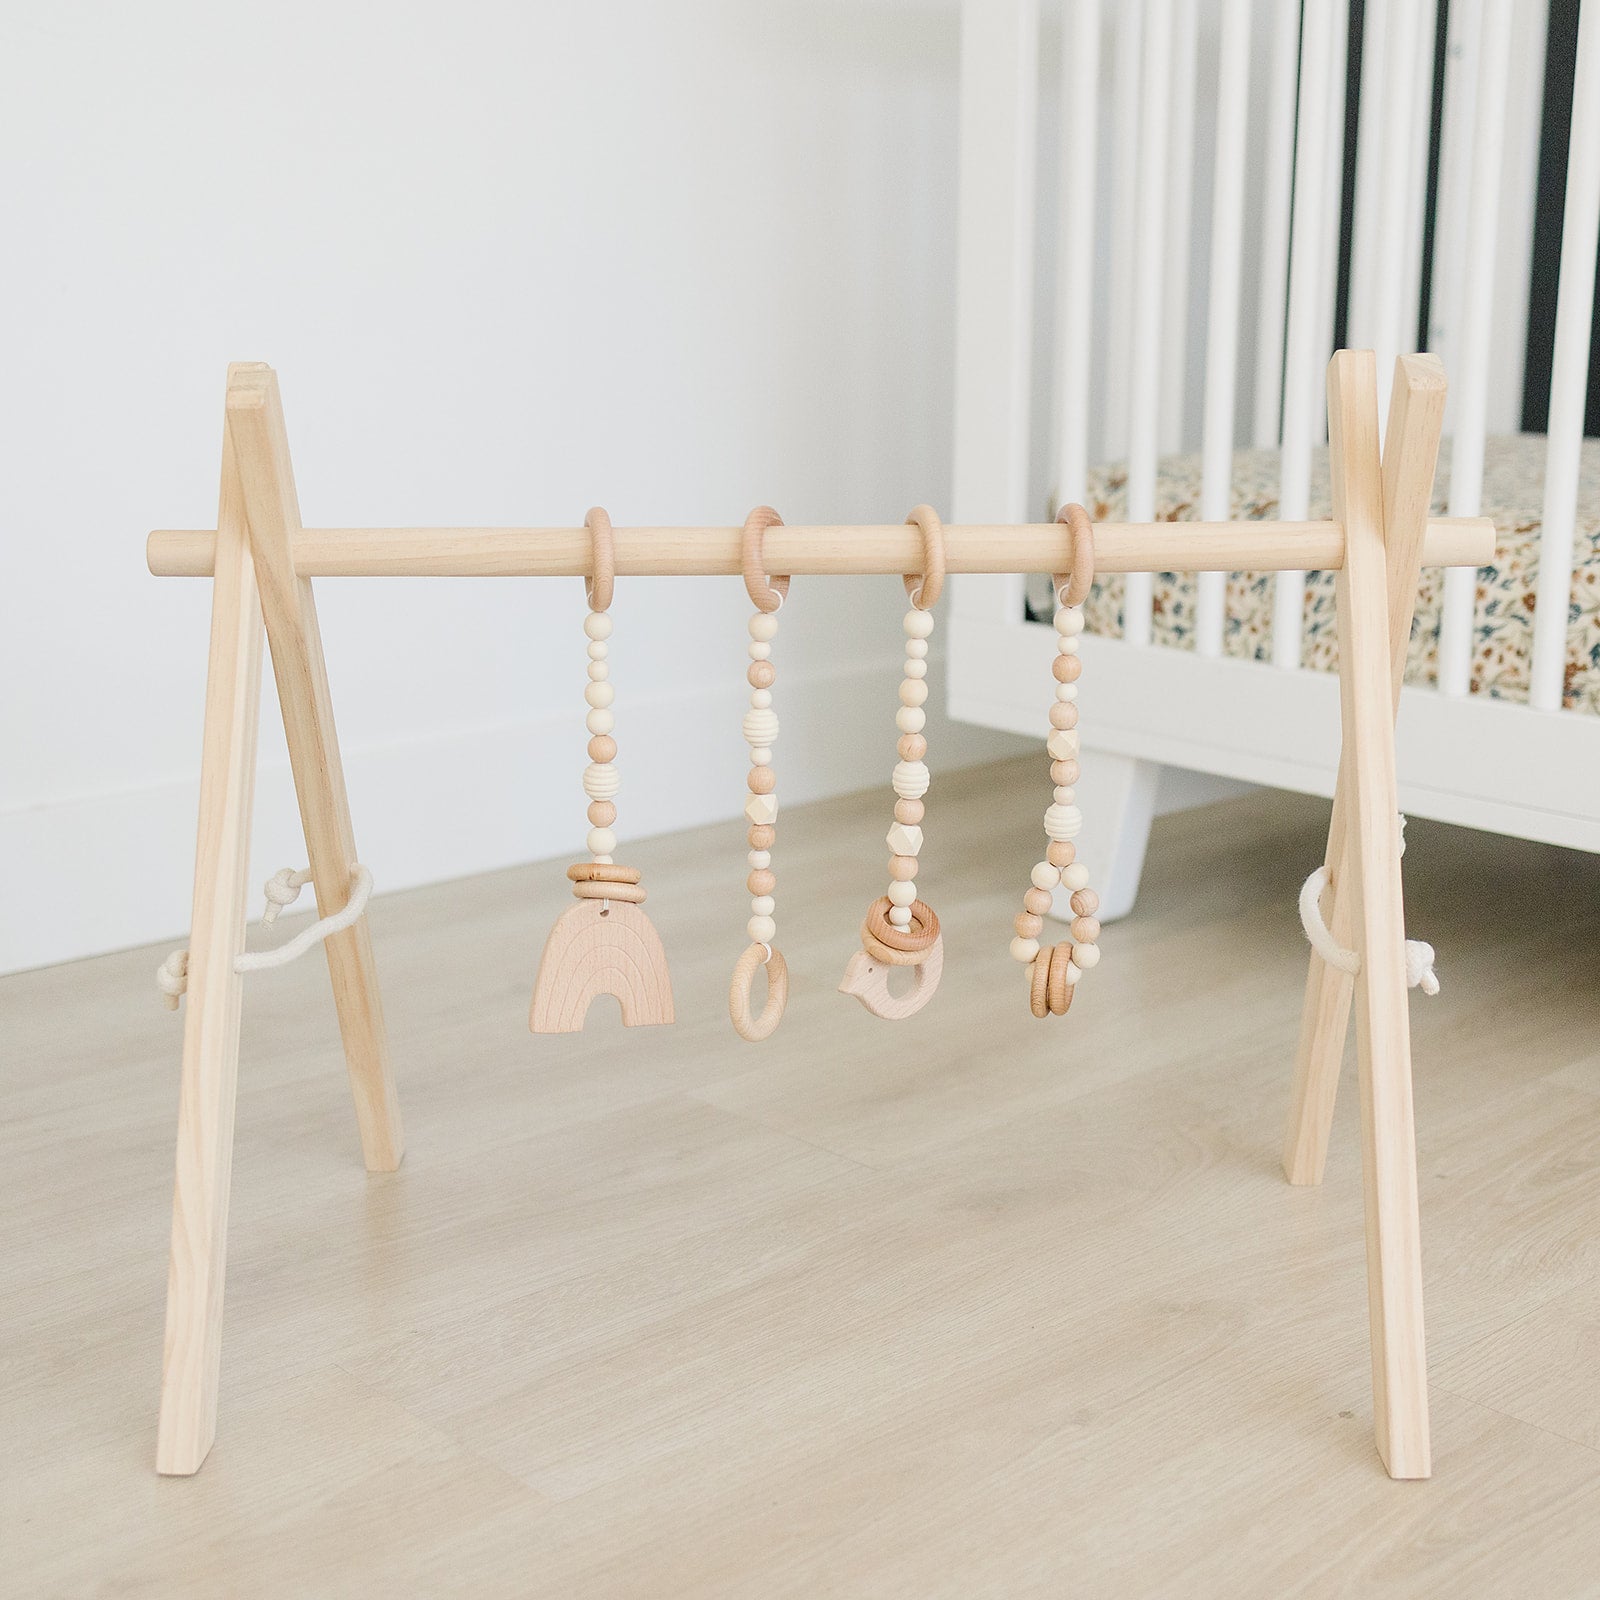 Wooden Baby Gym + Natural Wood Toys  - Poppyseed Play